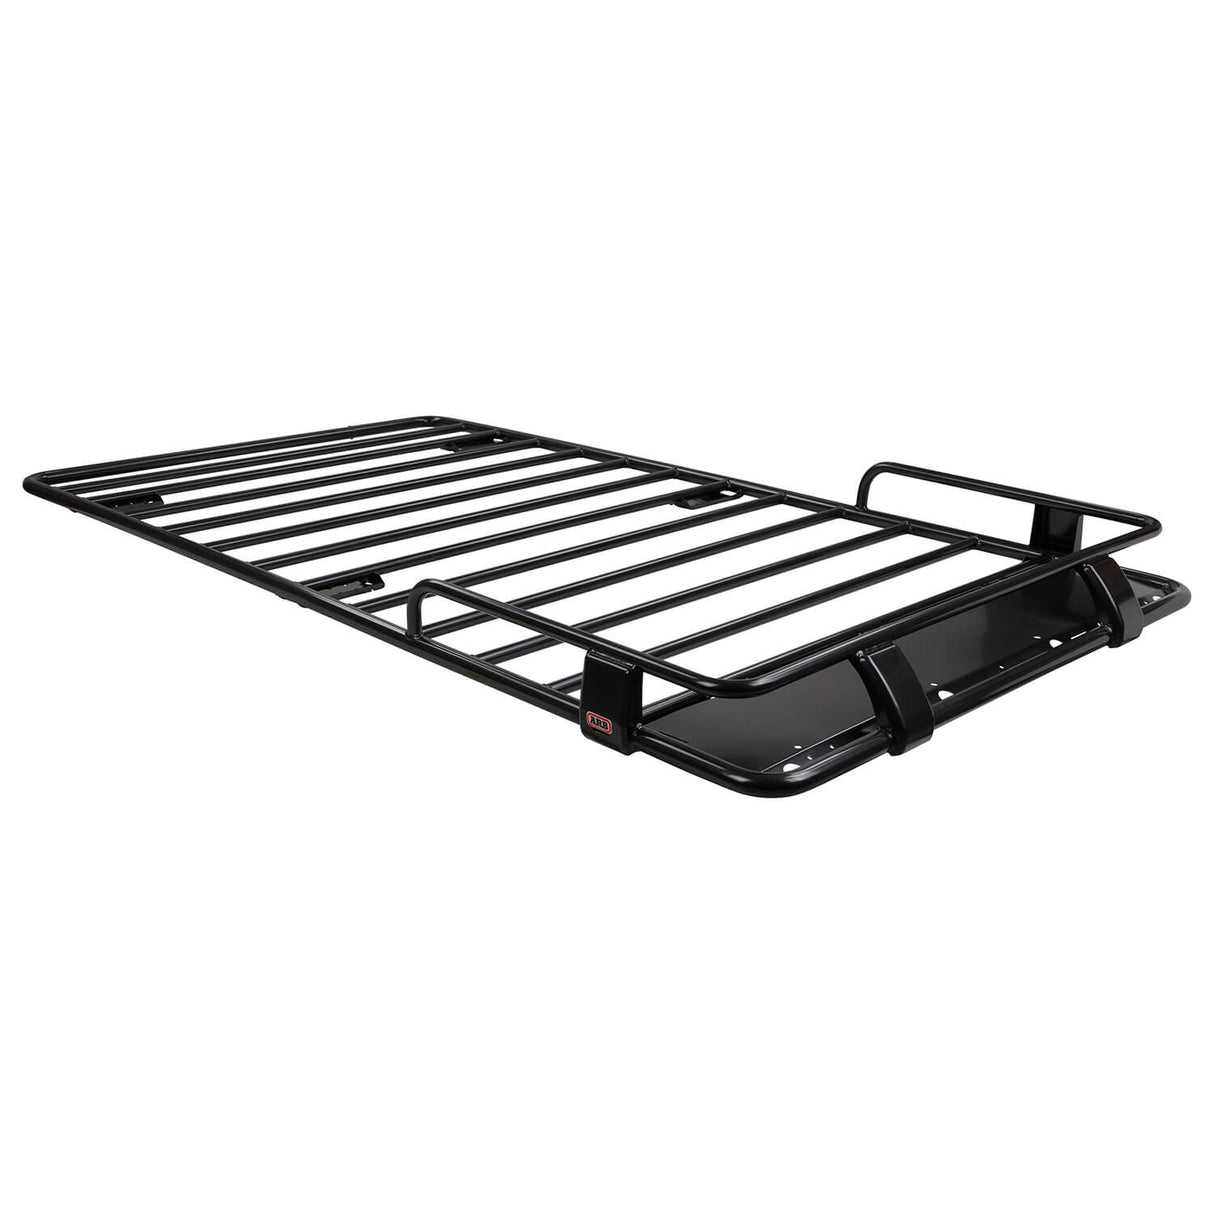 ARB - 3800200 - Roof Rack - Roam Overland Outfitters